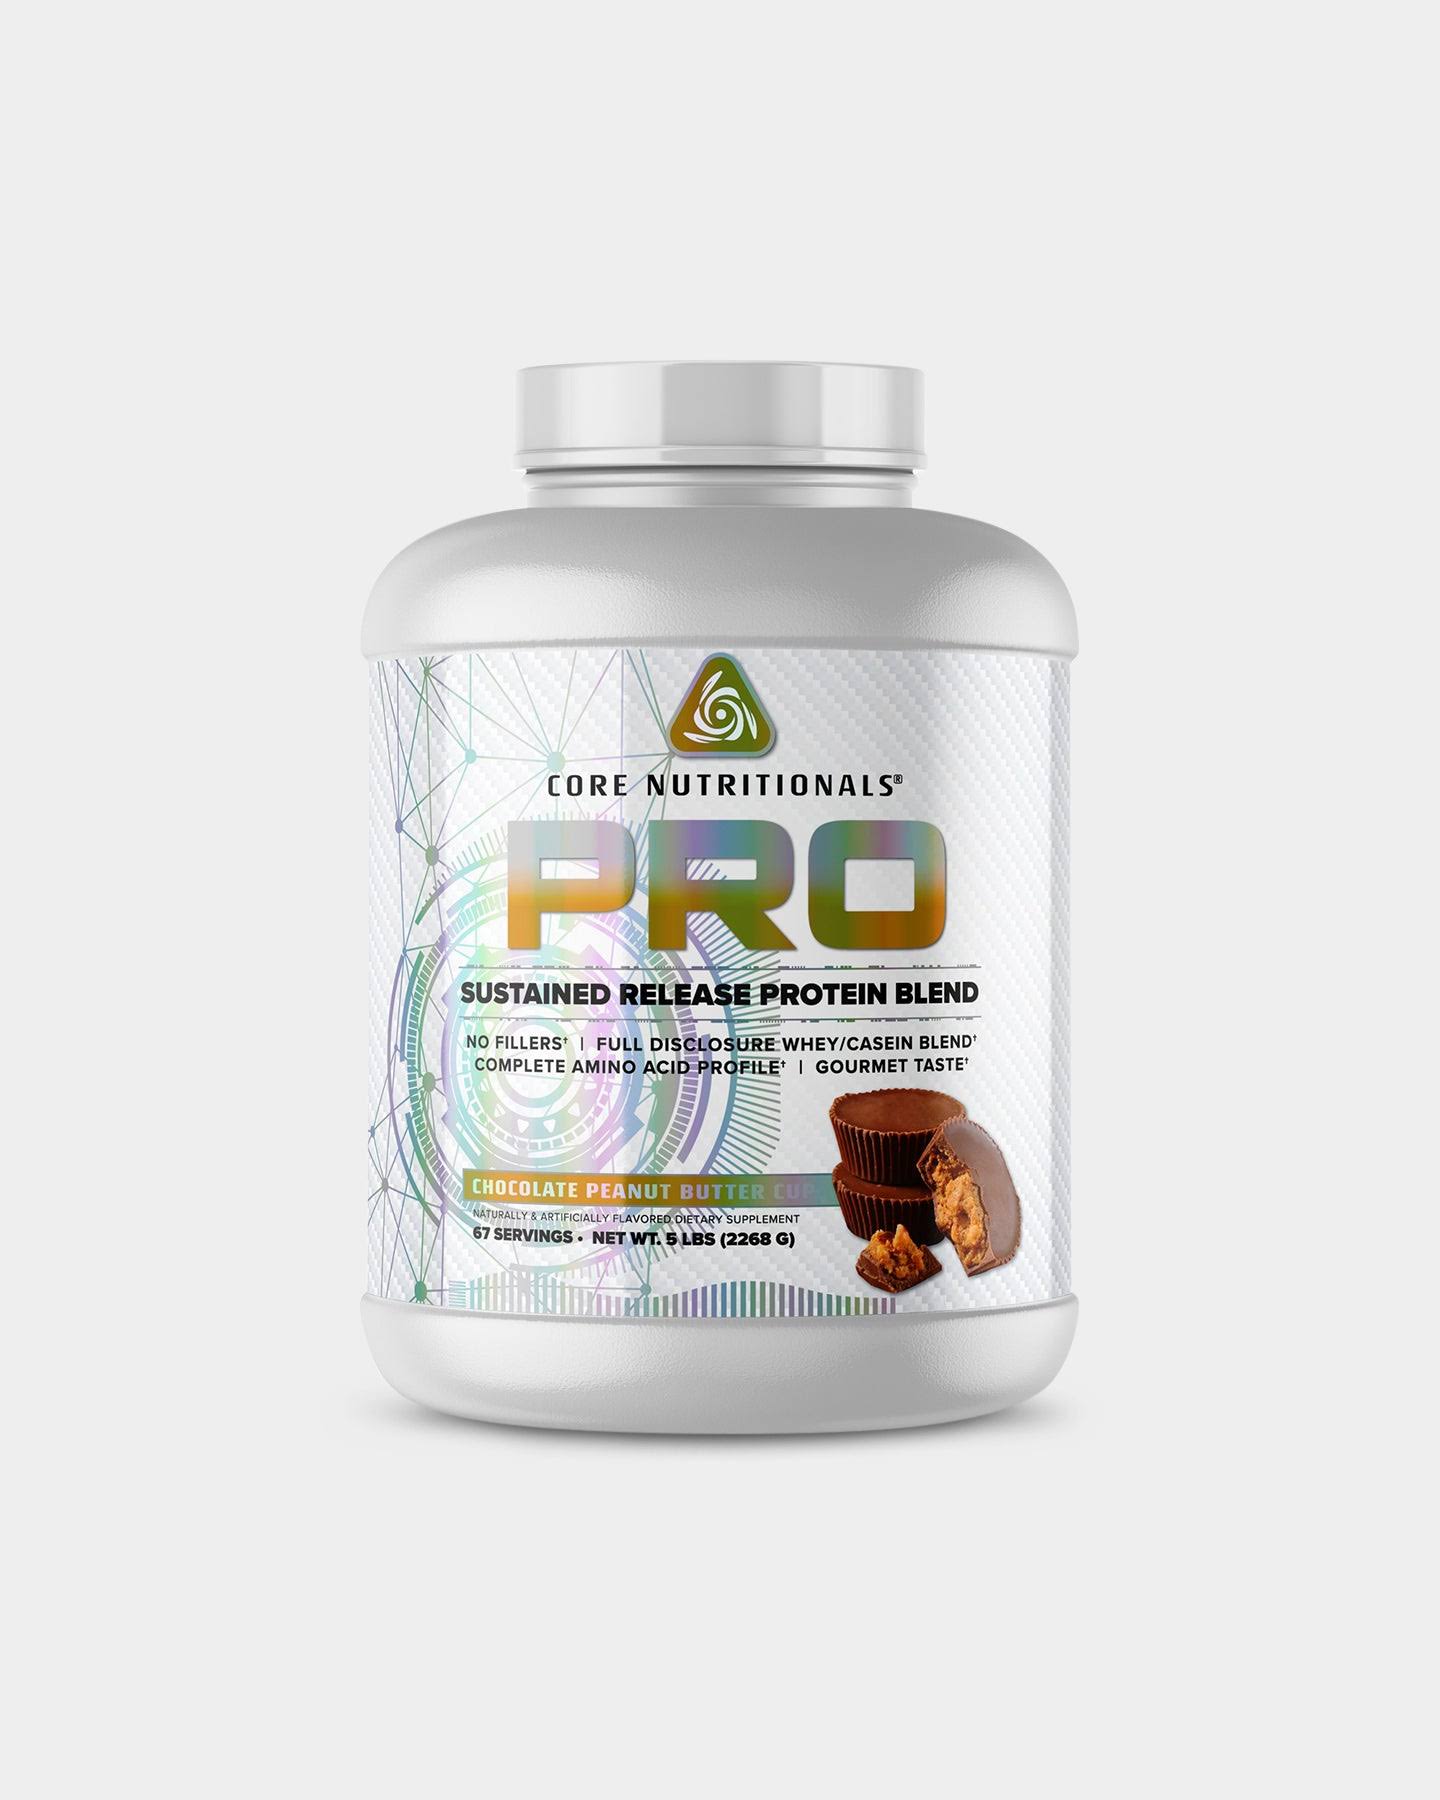 Core Nutritionals Core PRO Protein Blend in Chocolate Peanut Butter Cup | 2.2 Kilograms